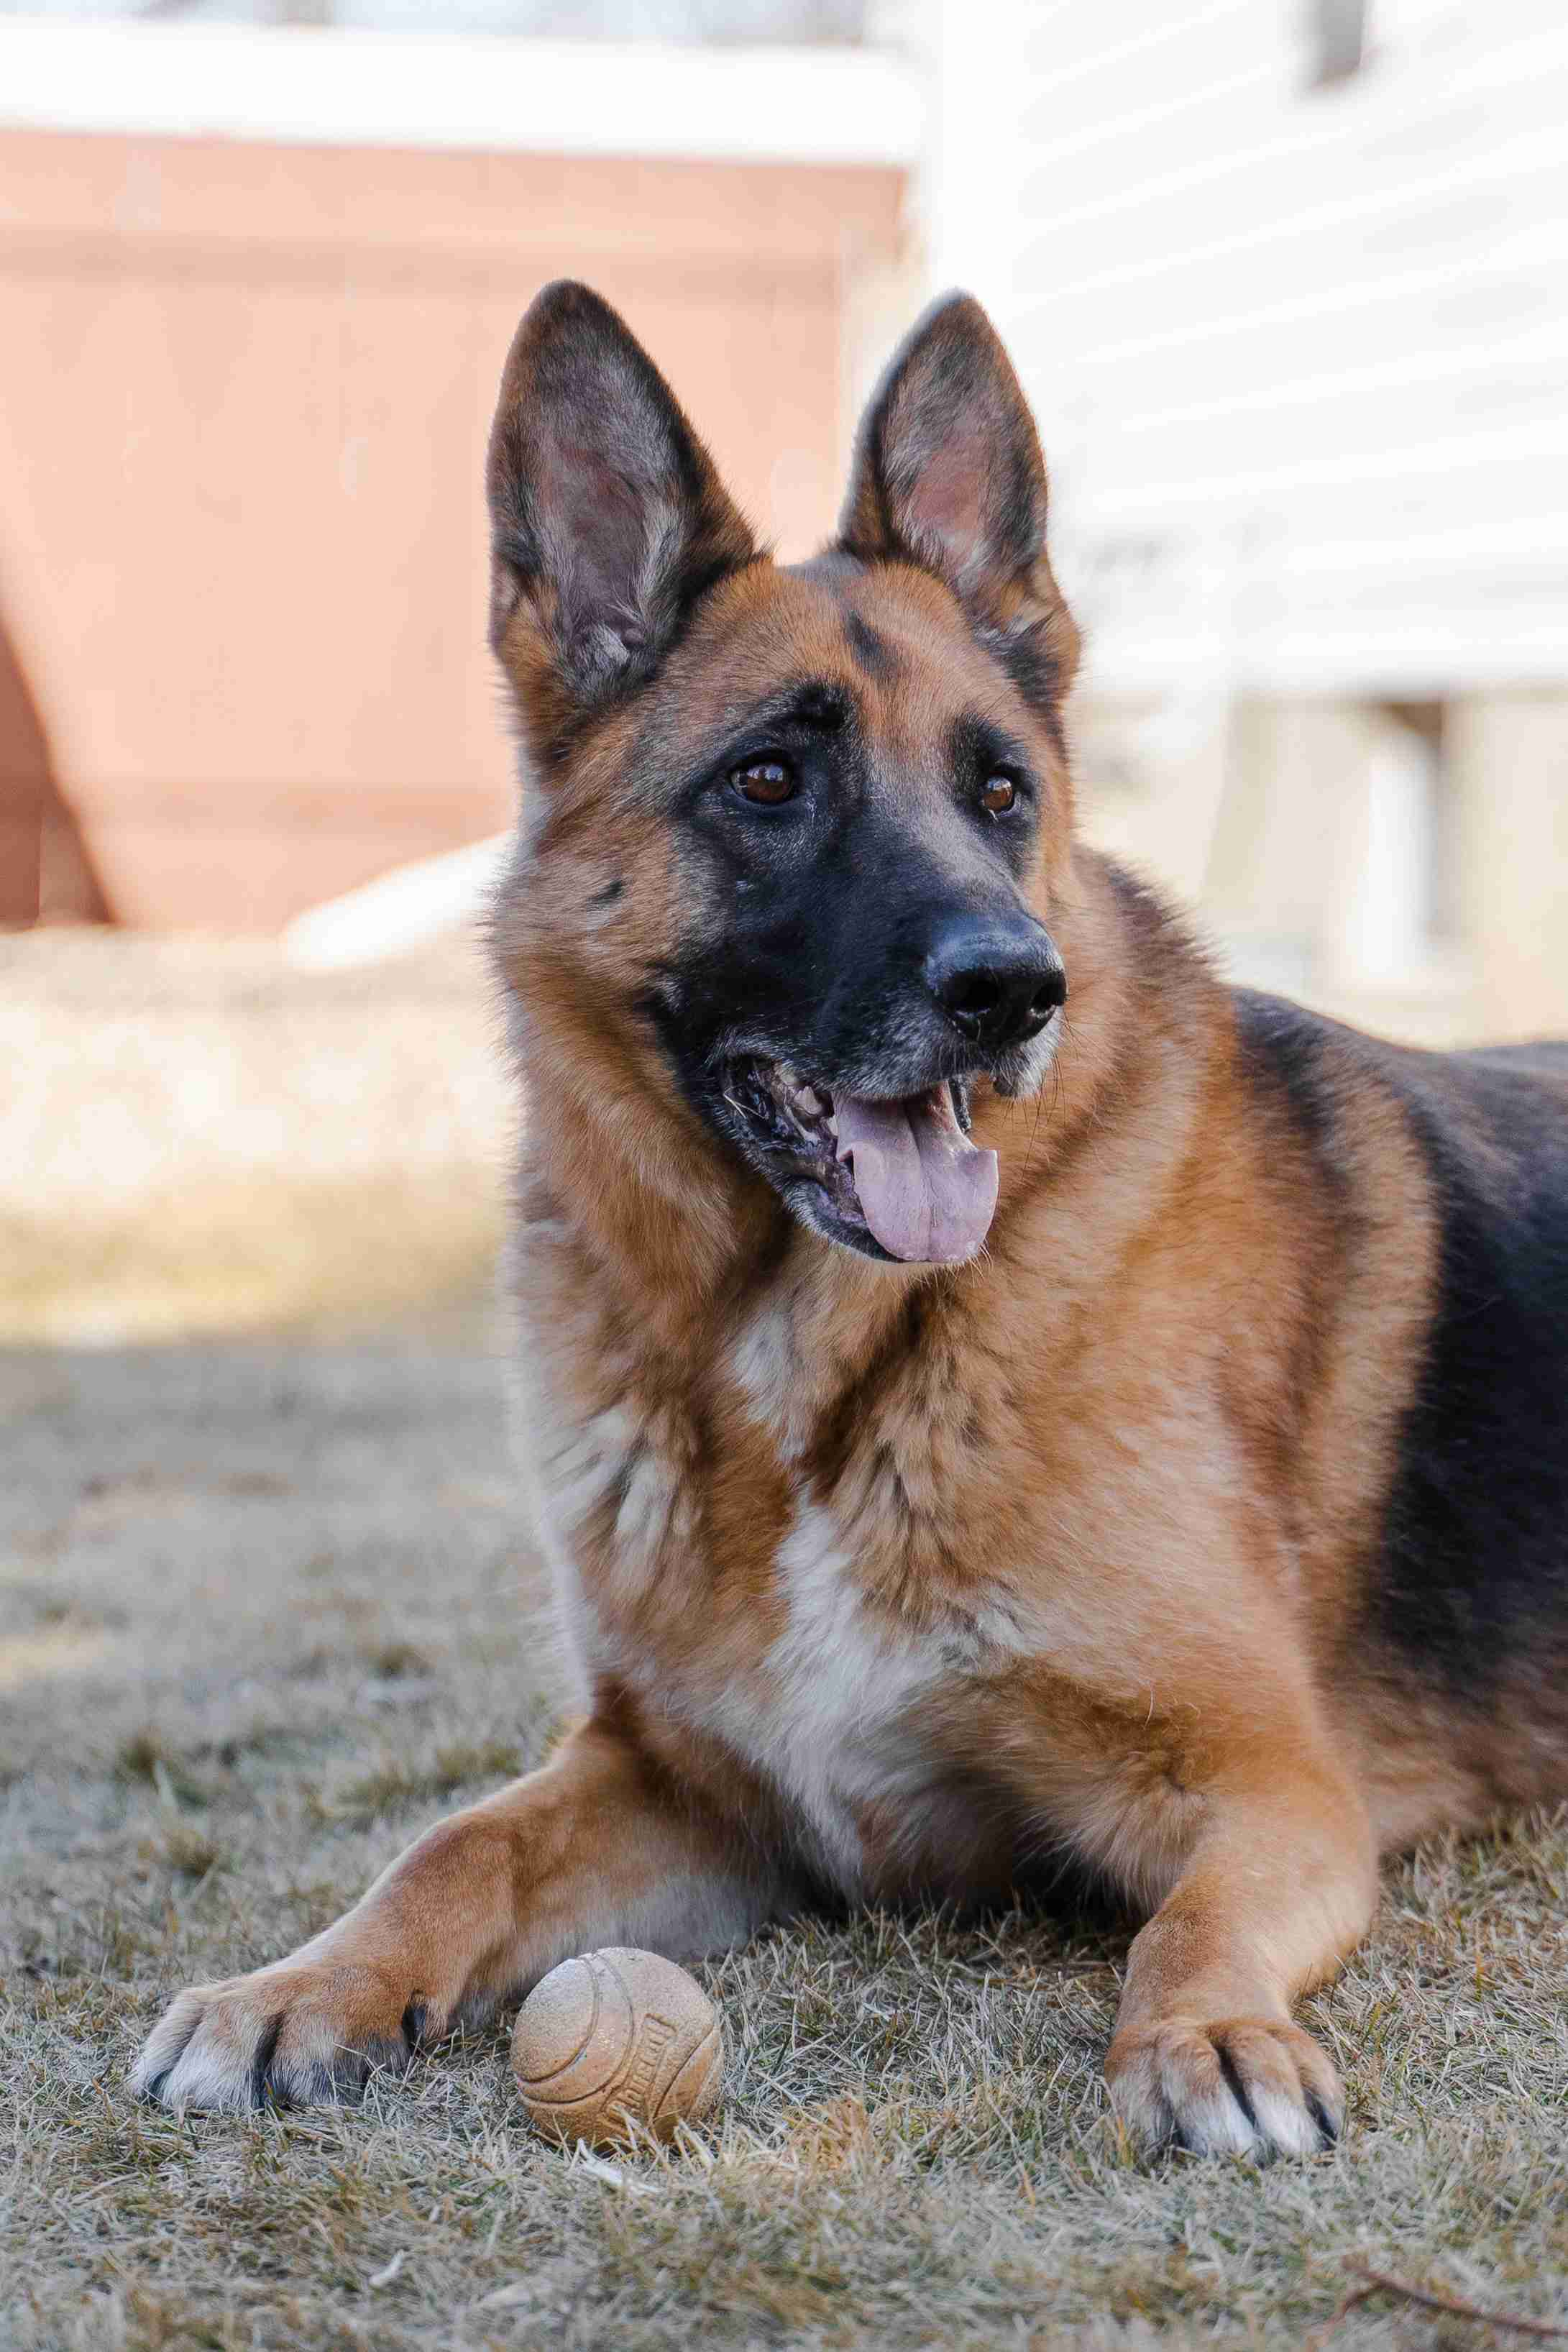 What is the best way to prevent jealousy towards other pets in a German shepherd?